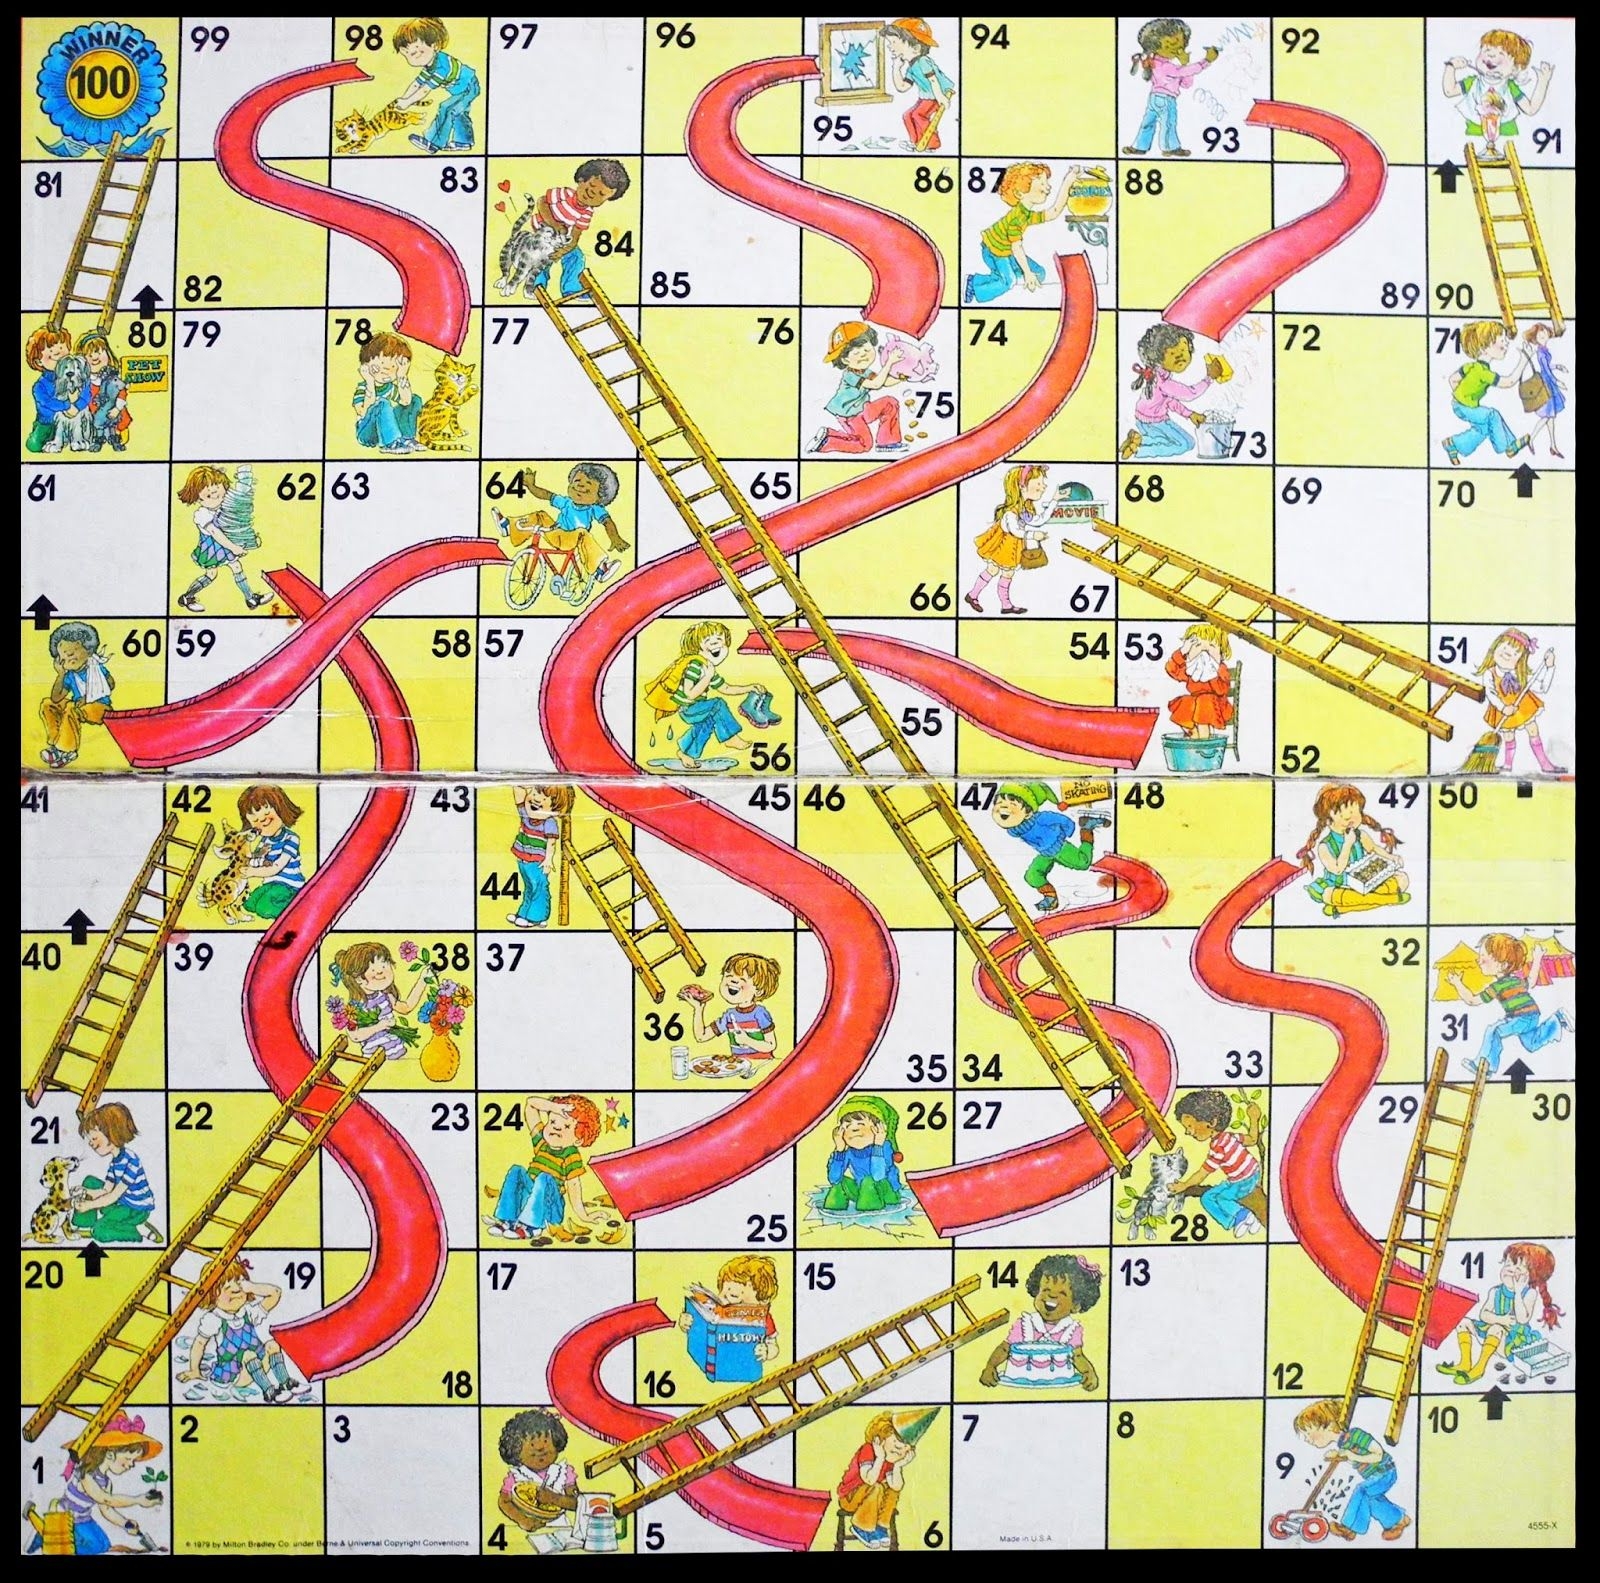 Chutes And Ladders Printable Yahoo Search Results Childhood Games Ladders Game Childhood